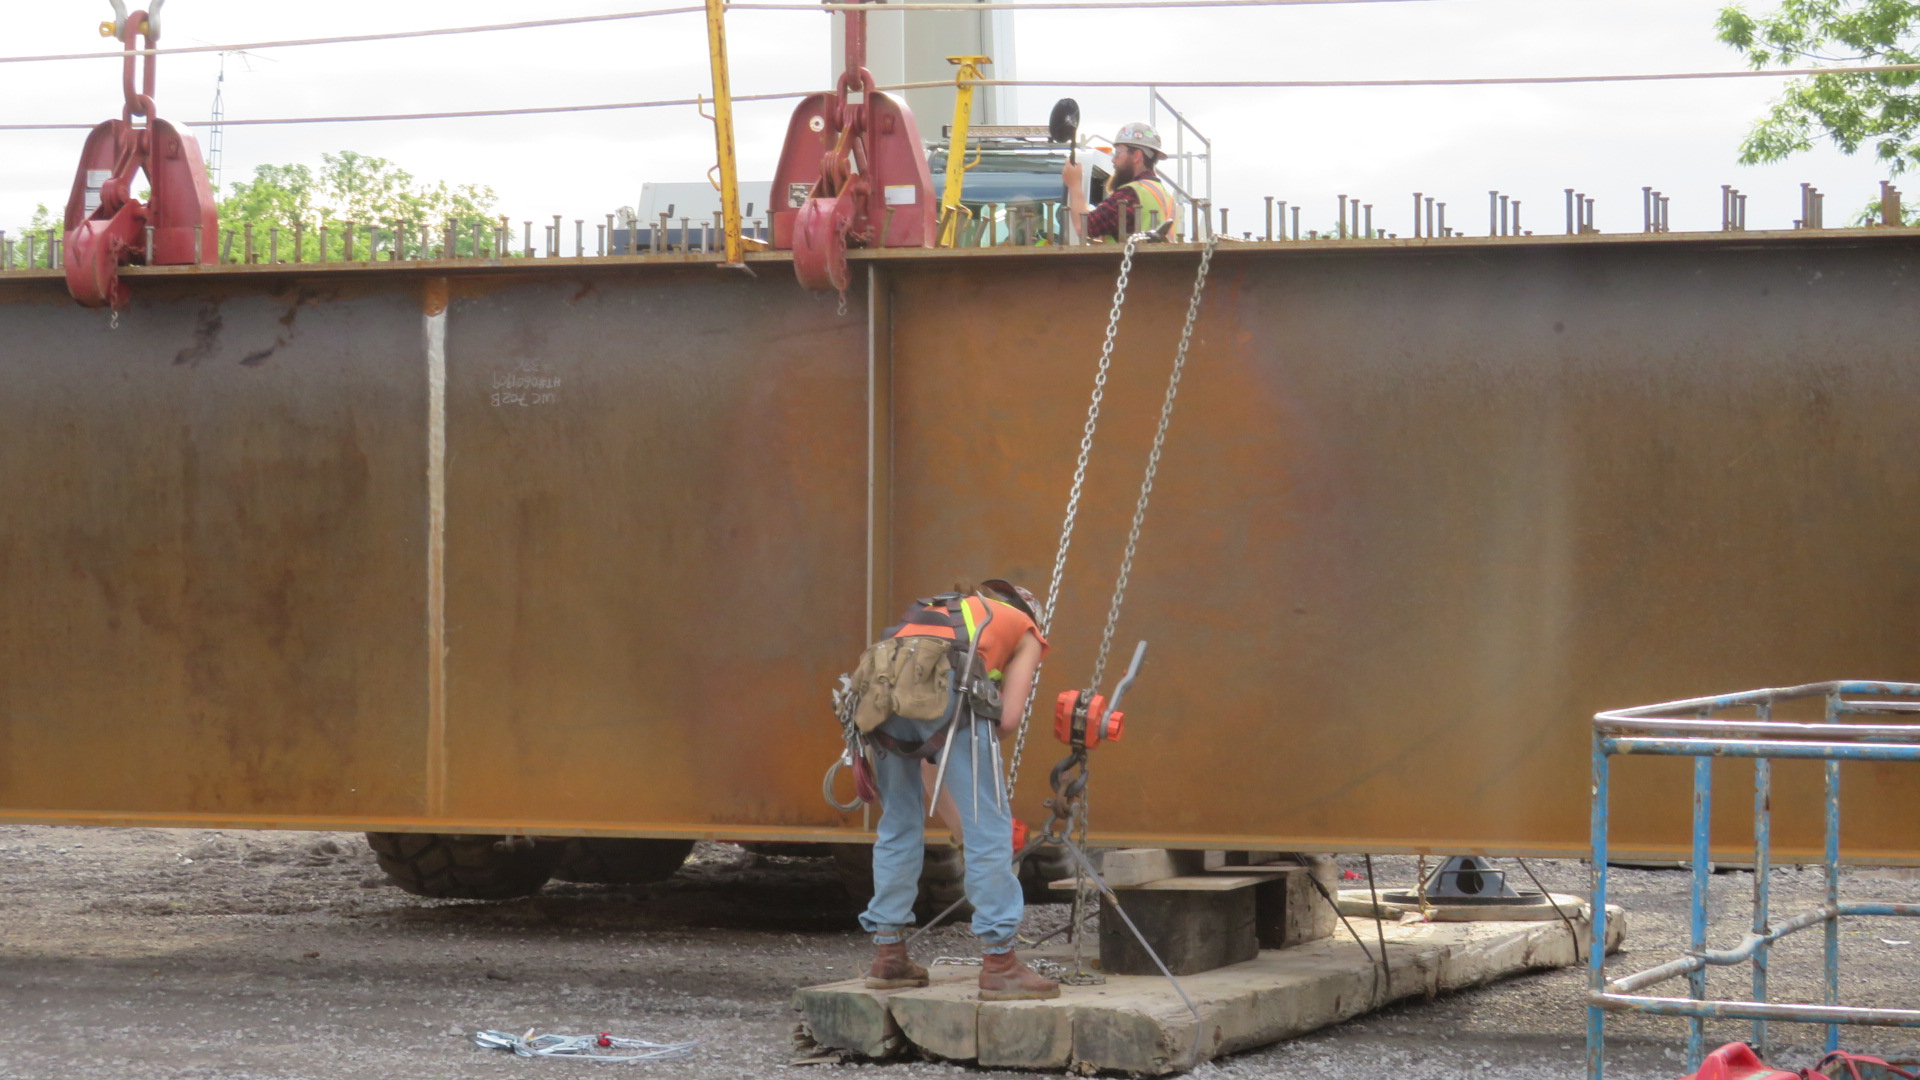 Removing the chains / restraints from the girder